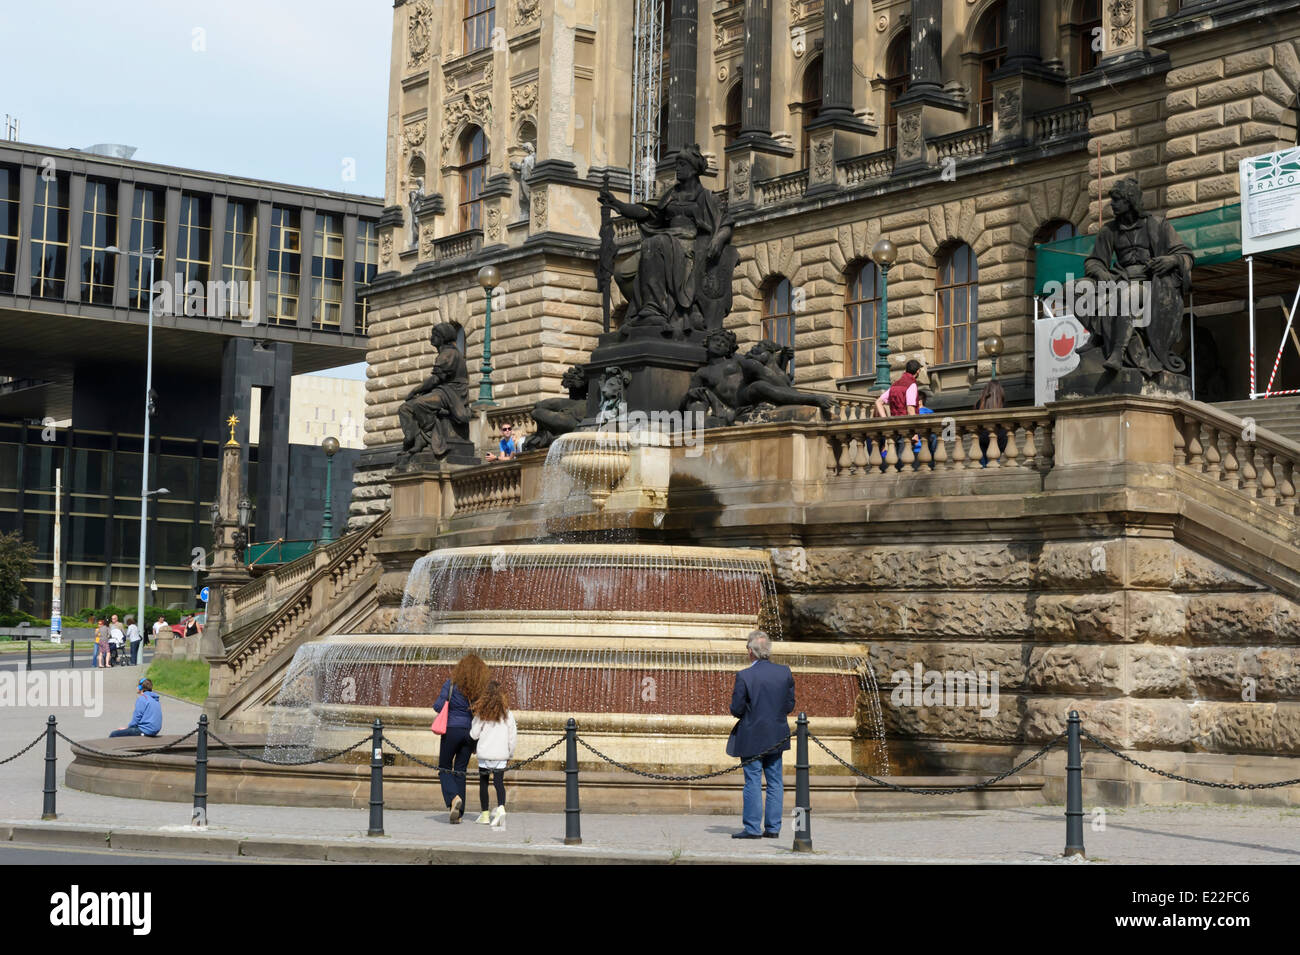 The ornate exterior of the National Museum and water fountain in Prague, Czech Republic. Stock Photo